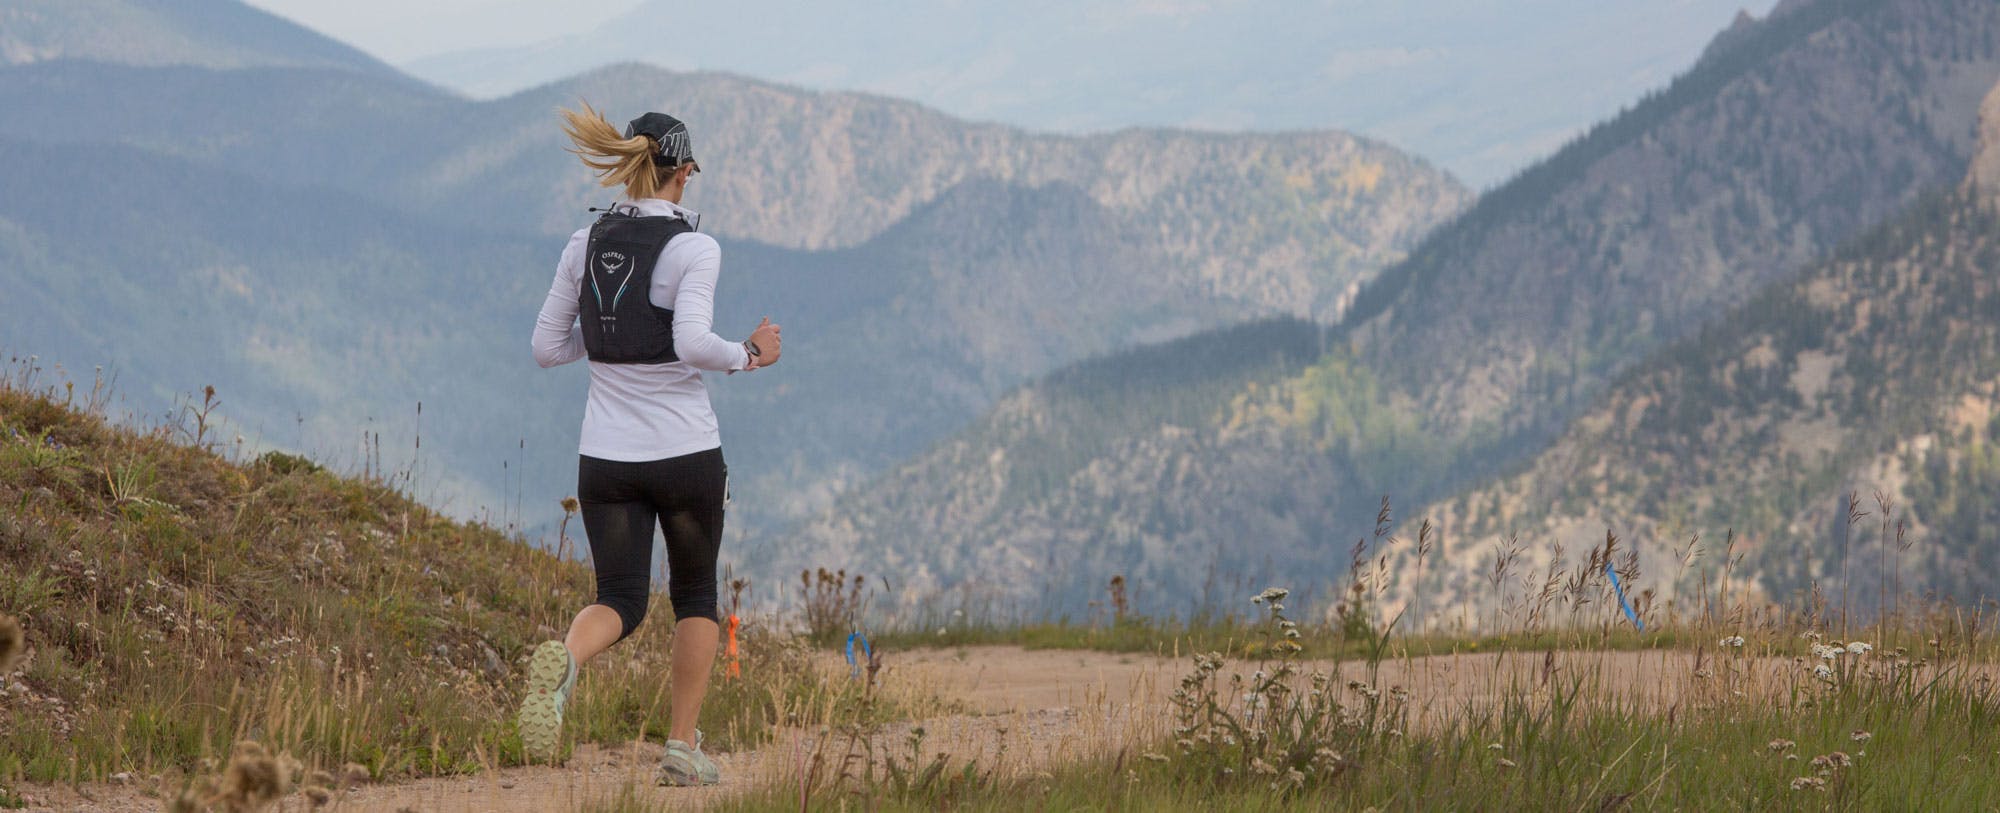 Under Armour 2017 Mountain Running Series: Copper Mountain, CO